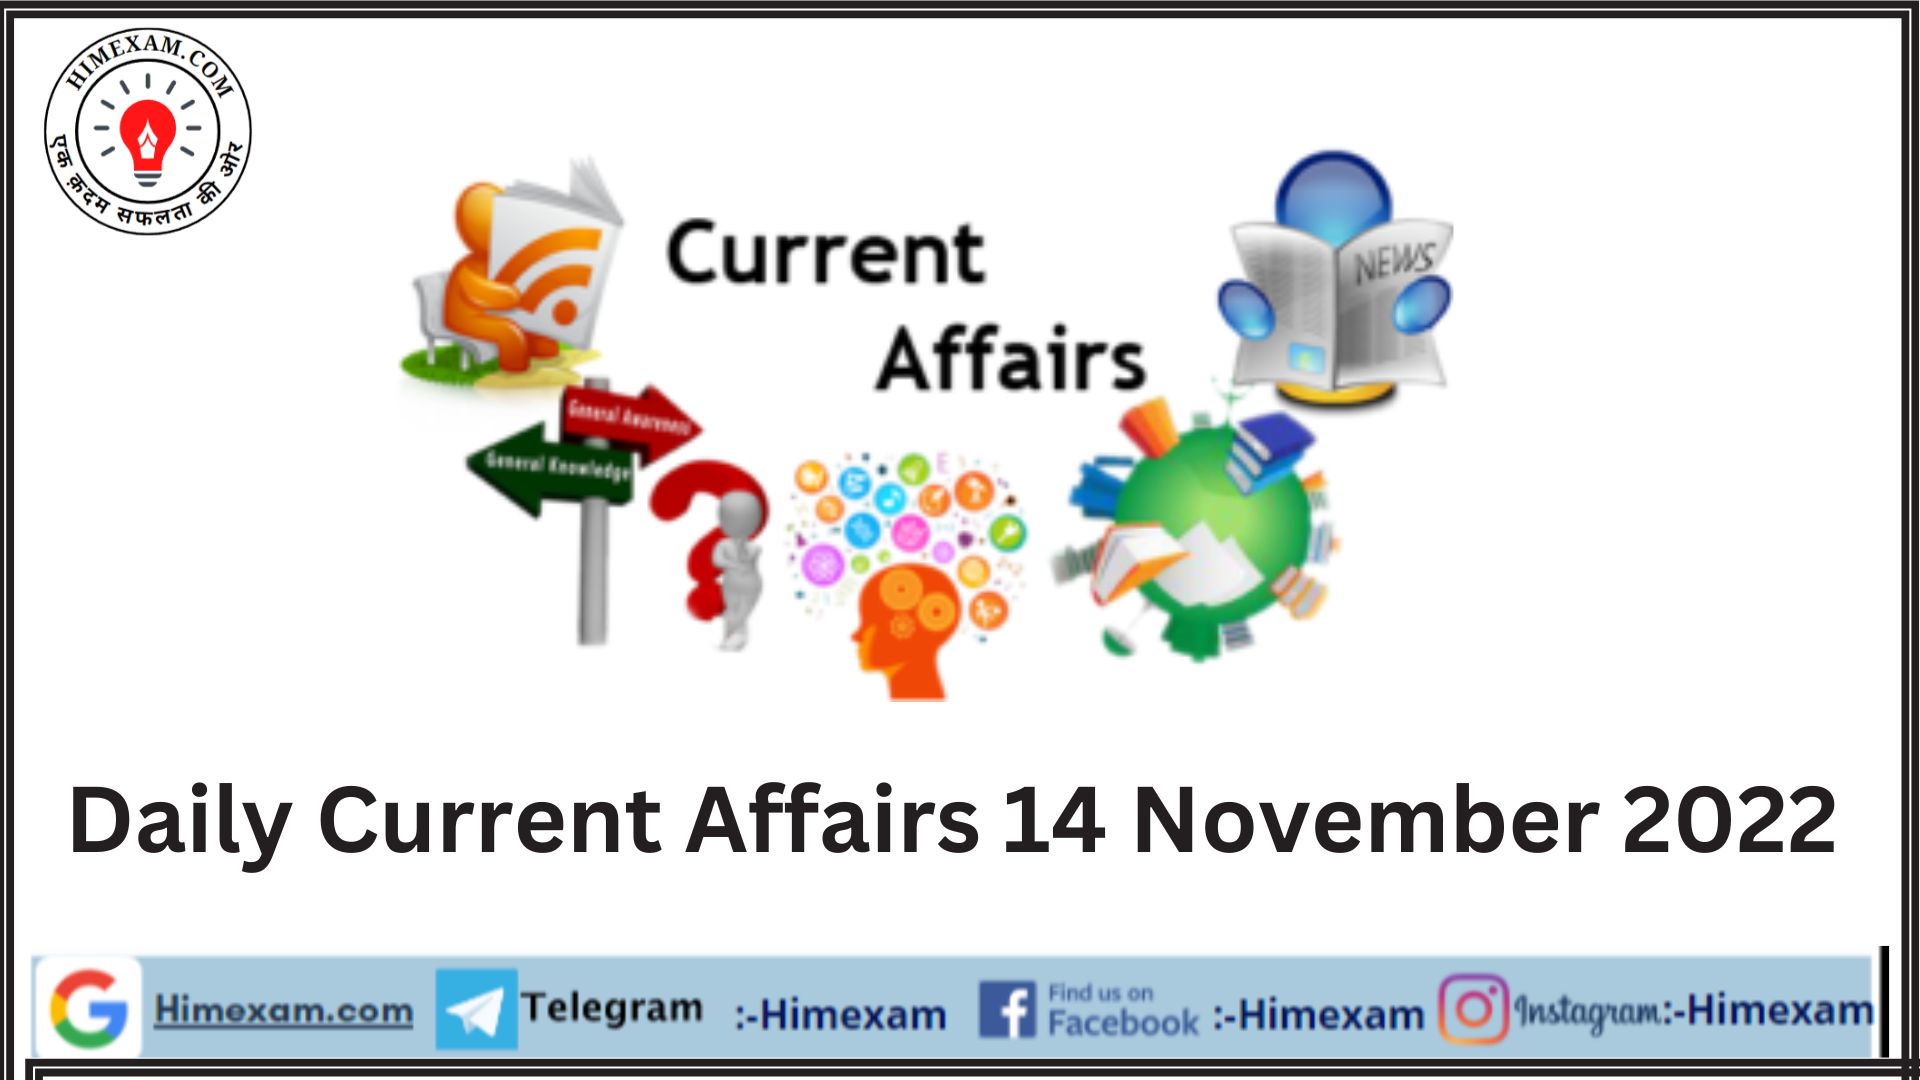 Daily Current Affairs 14 November 2022